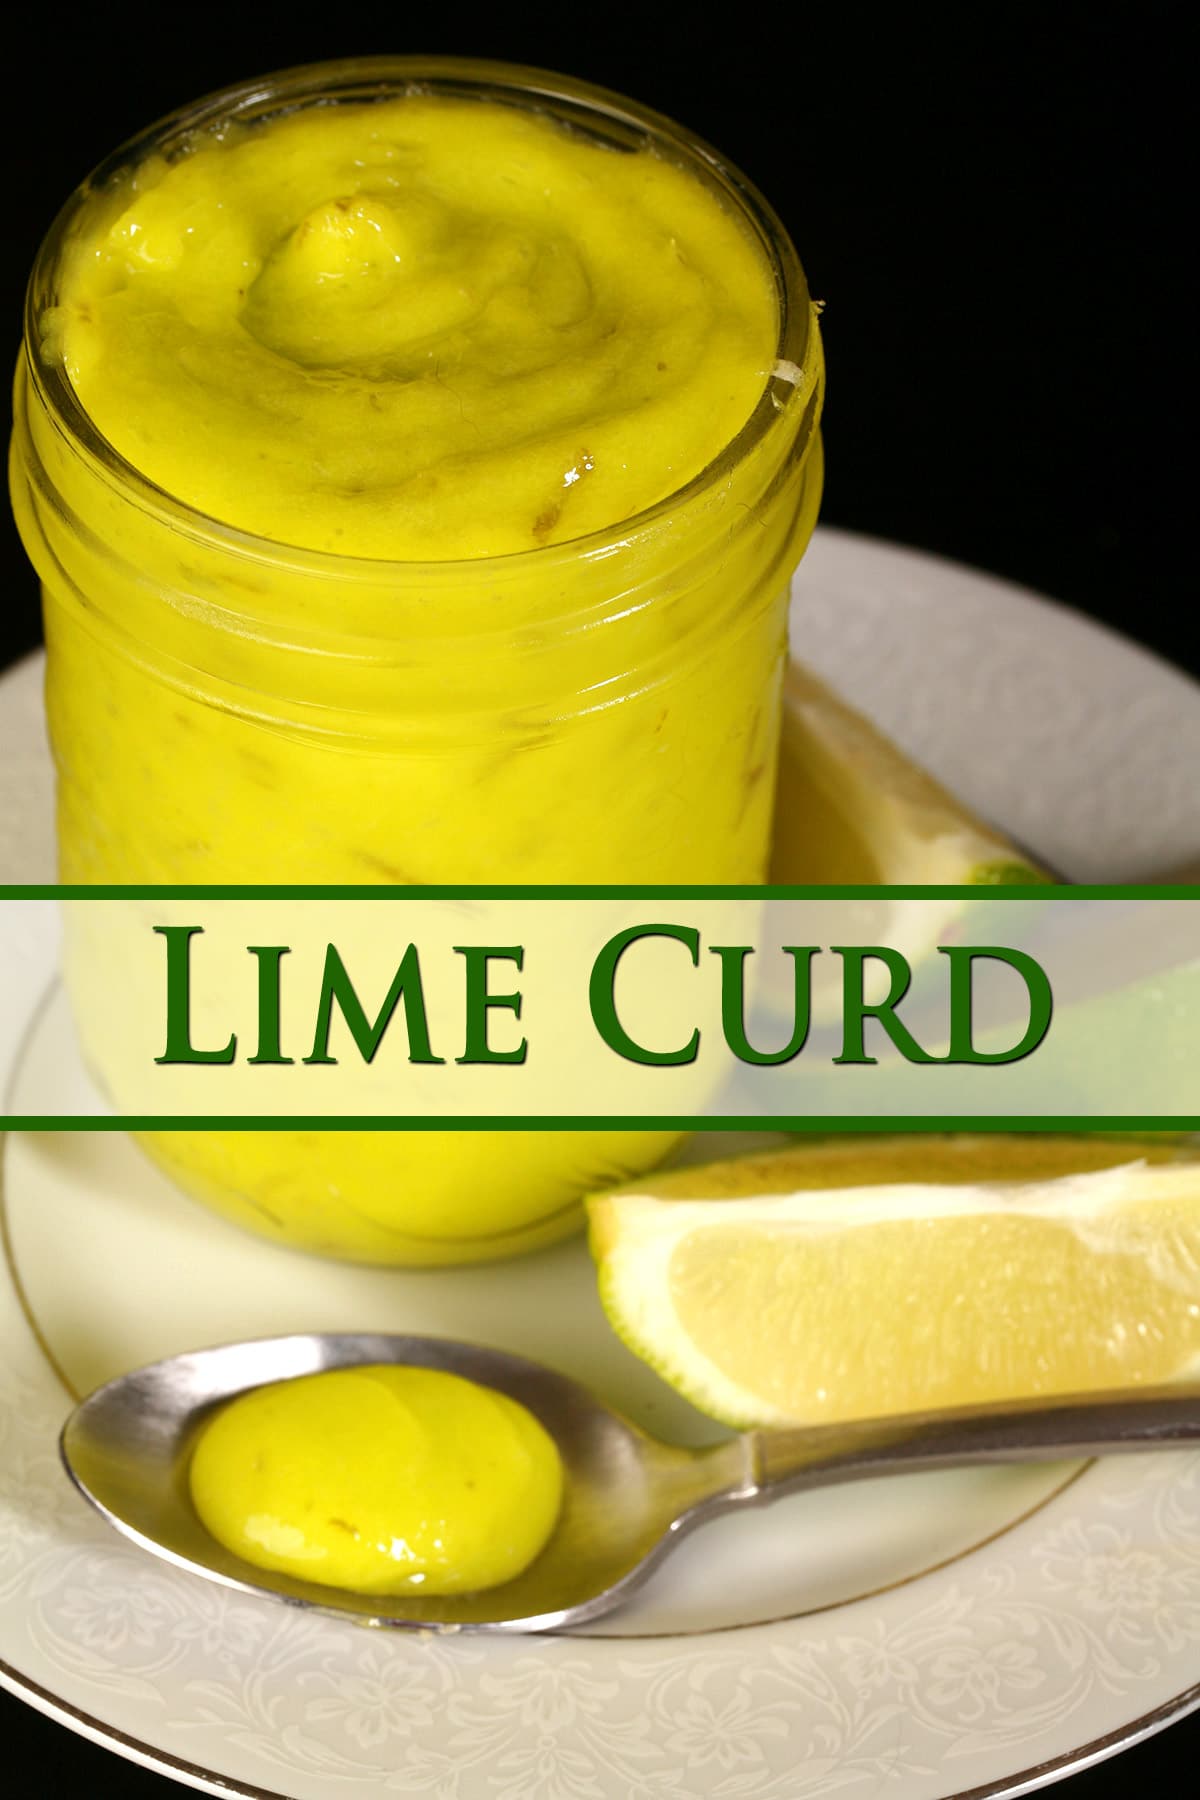 A jam jar of lime curd on a plate with fresh lime slices.